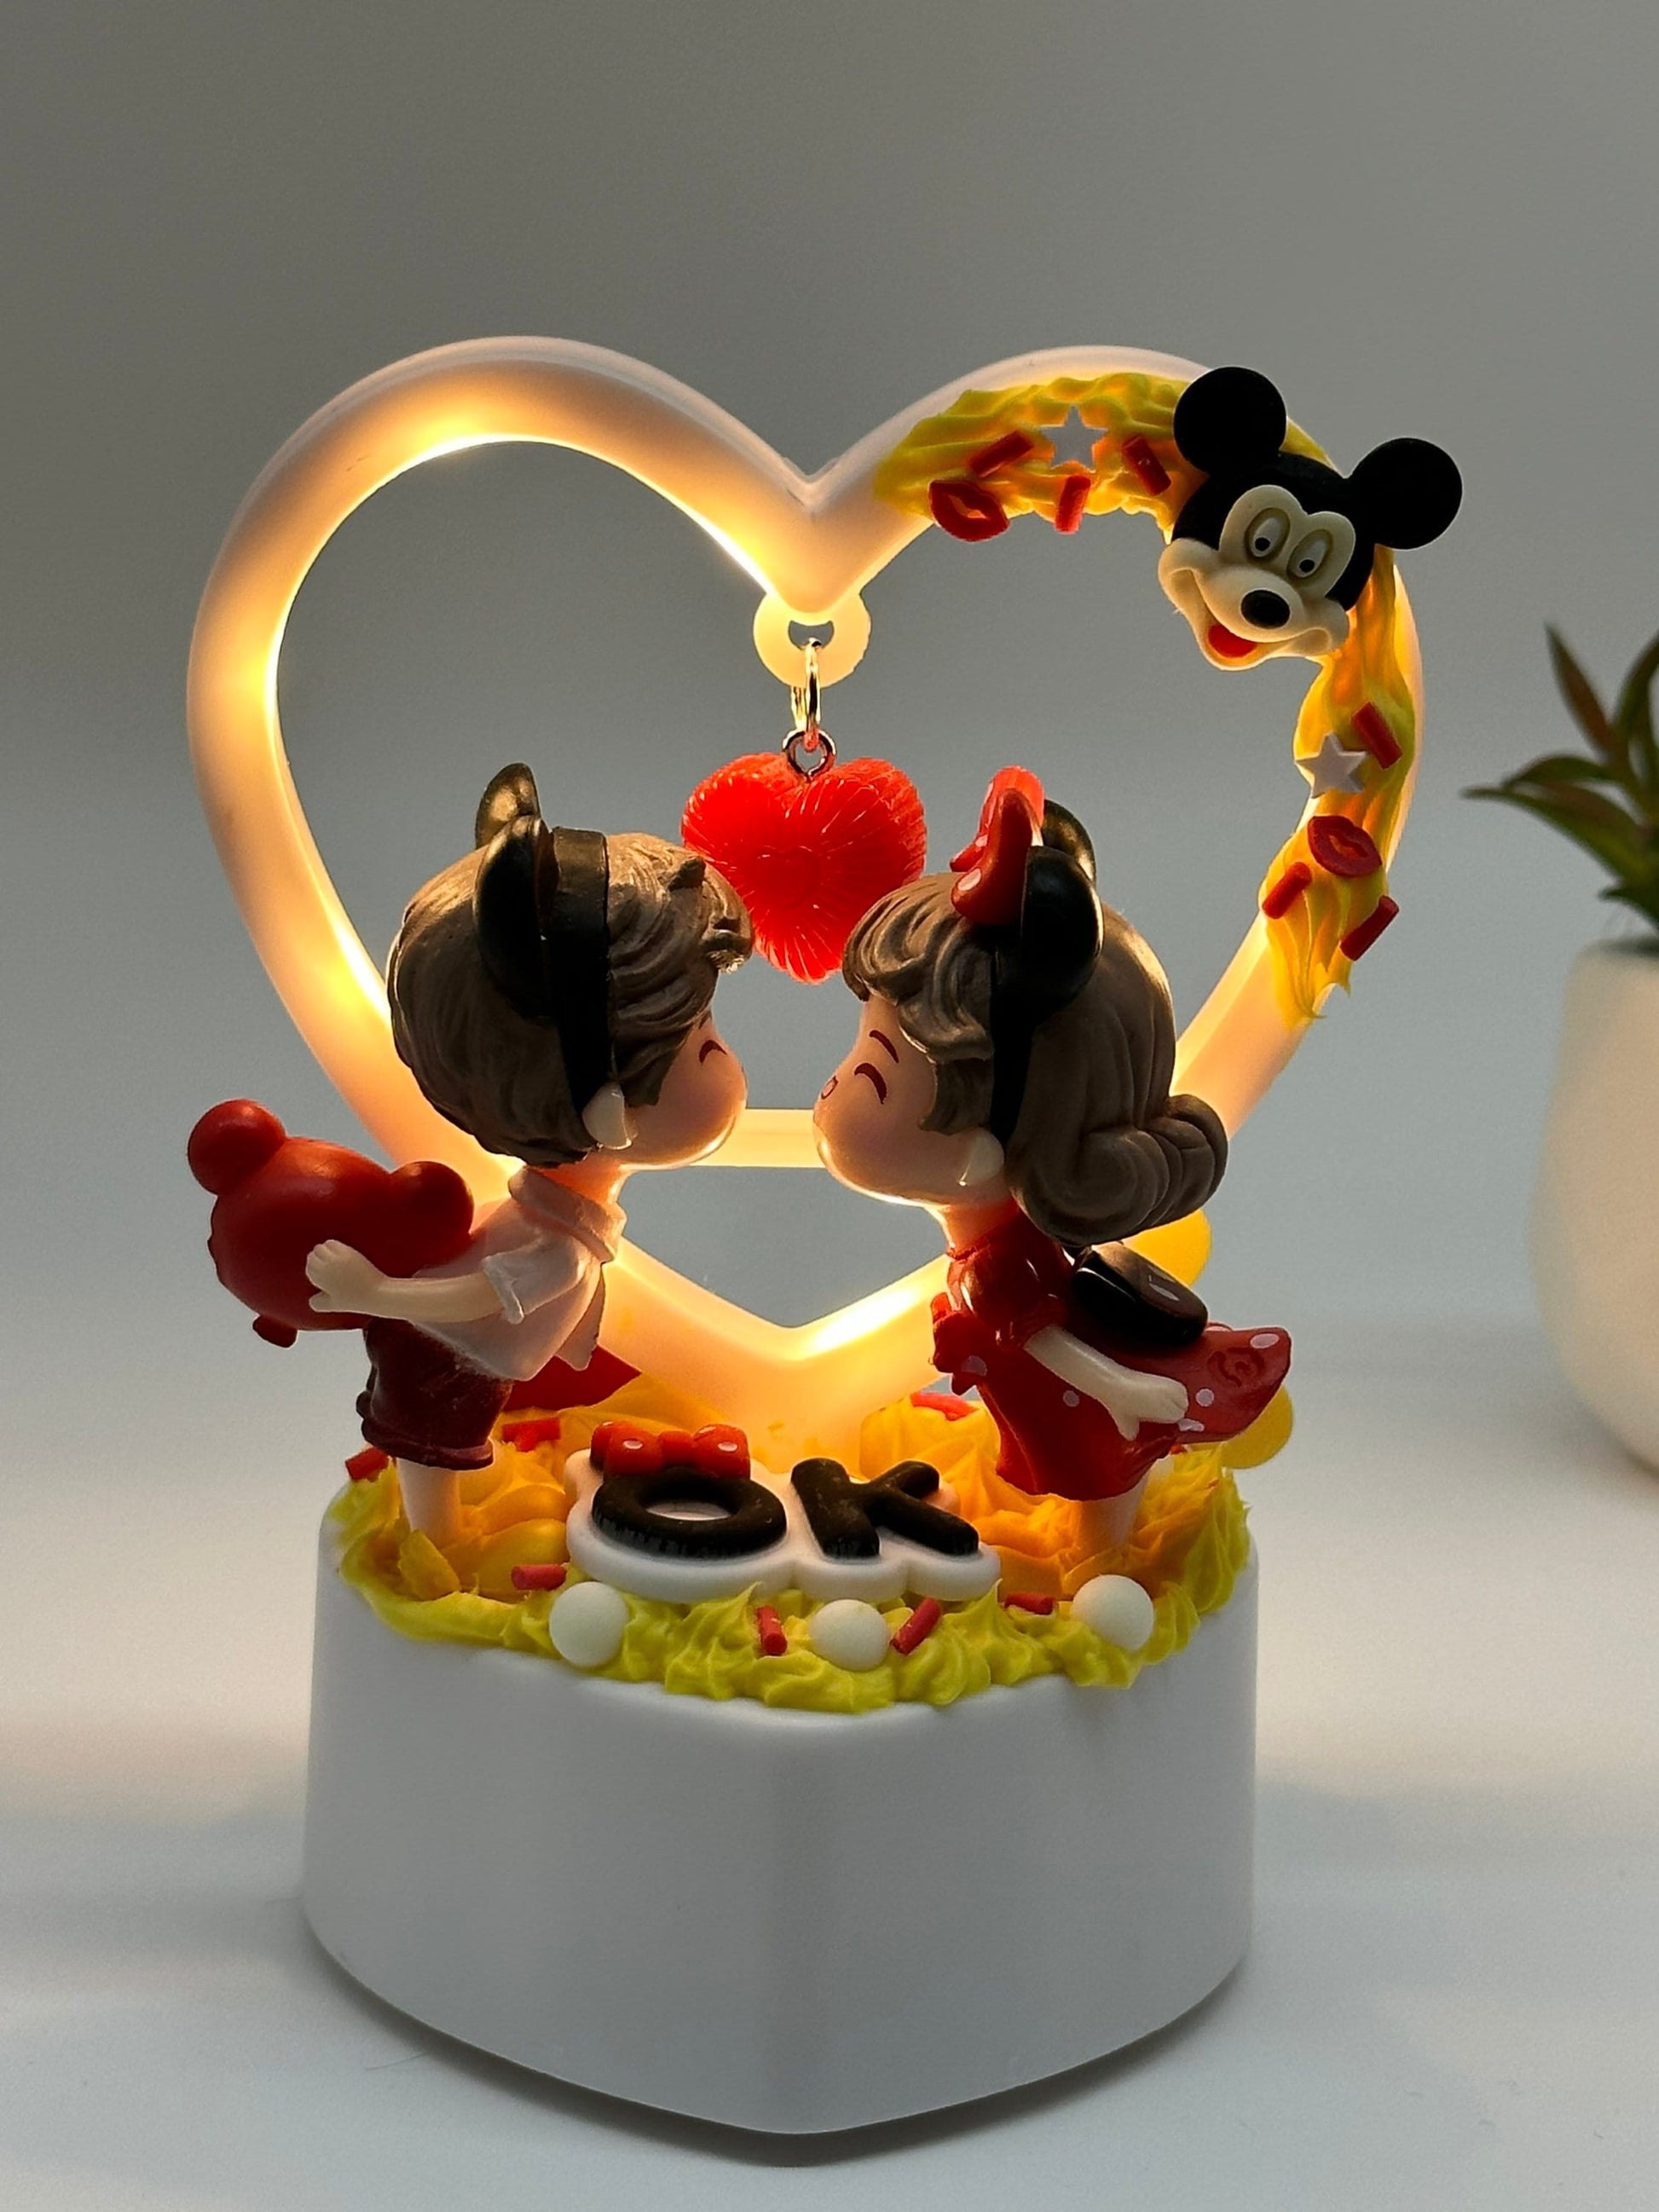 Little Accent Table Night Light, Lamp, Mermaid or Love Mouse Theme, Theme Park Engagement, Heart Shape Lamp Personalize option